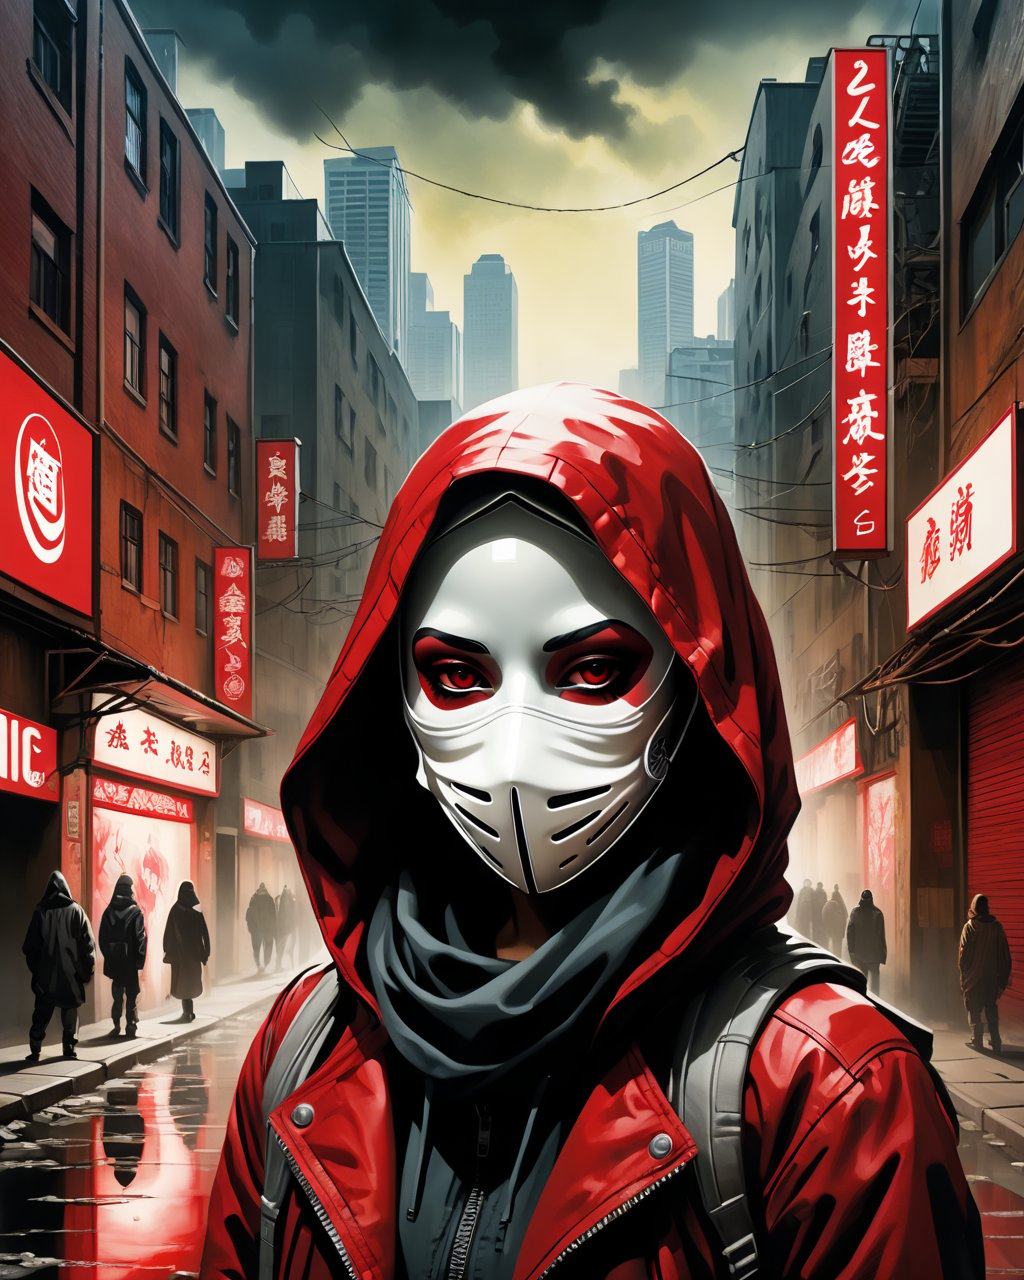 <lora:purtest5124x05:1> Epic scene, art shows a woman figure with a cloth draped over their head and a white mask with dark, hollow eyes and red markings. The background suggests an urban setting, perhaps an underground passage, with dim lighting. The figure is dressed in a Nike jacket, adding a modern, streetwear element to the eerie, almost apocalyptic feel, Urban Art, Dark art, by Shepard Fairey and Katsuhiro Otomo, movie poster, extremely detailed, hyper resolution, cinematic volumetric lighting,